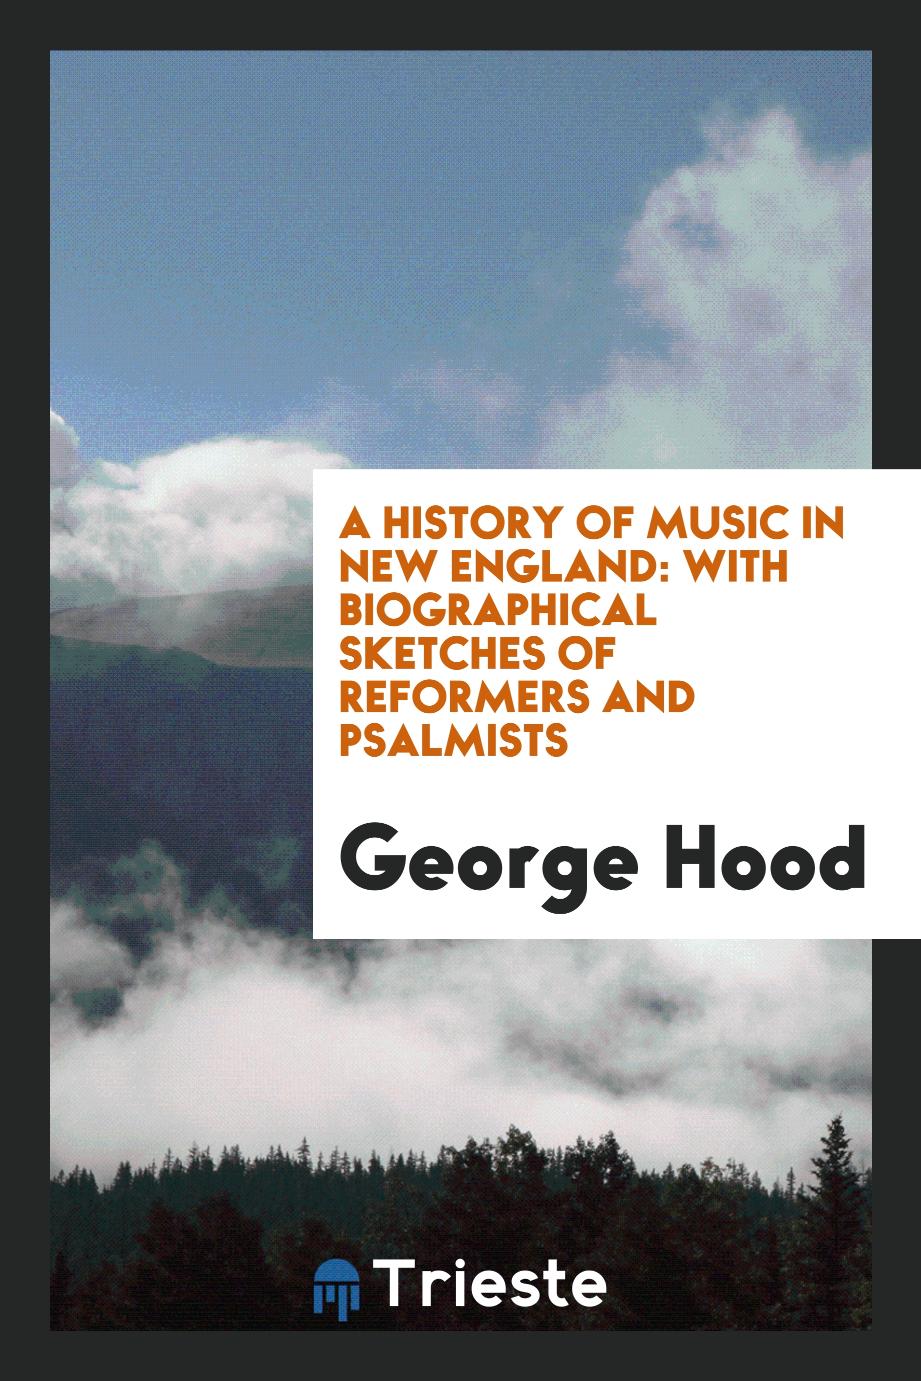 A history of music in New England: with biographical sketches of reformers and psalmists